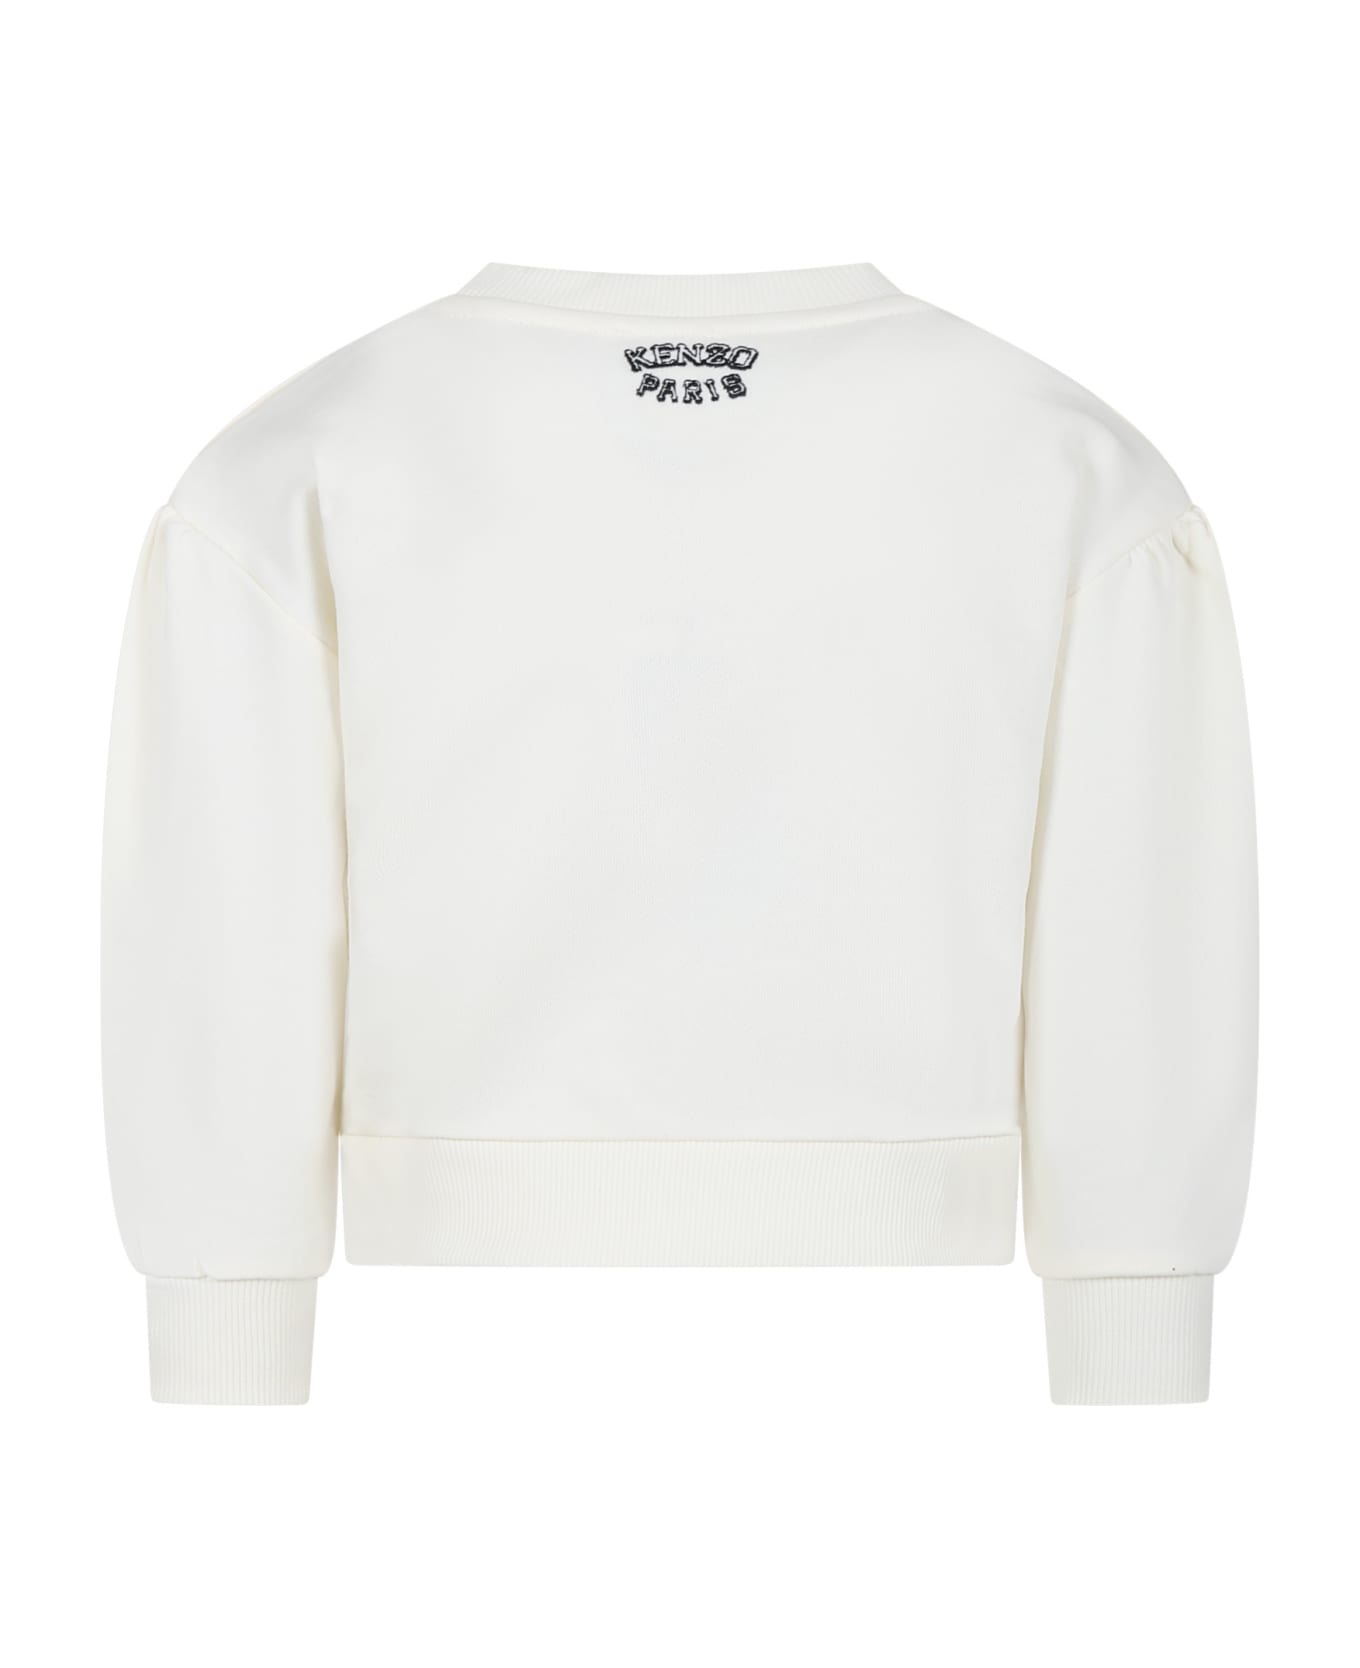 Kenzo Kids Ivory Sweatshirt For Girl With Iconic Tiger And Logo - Ivory